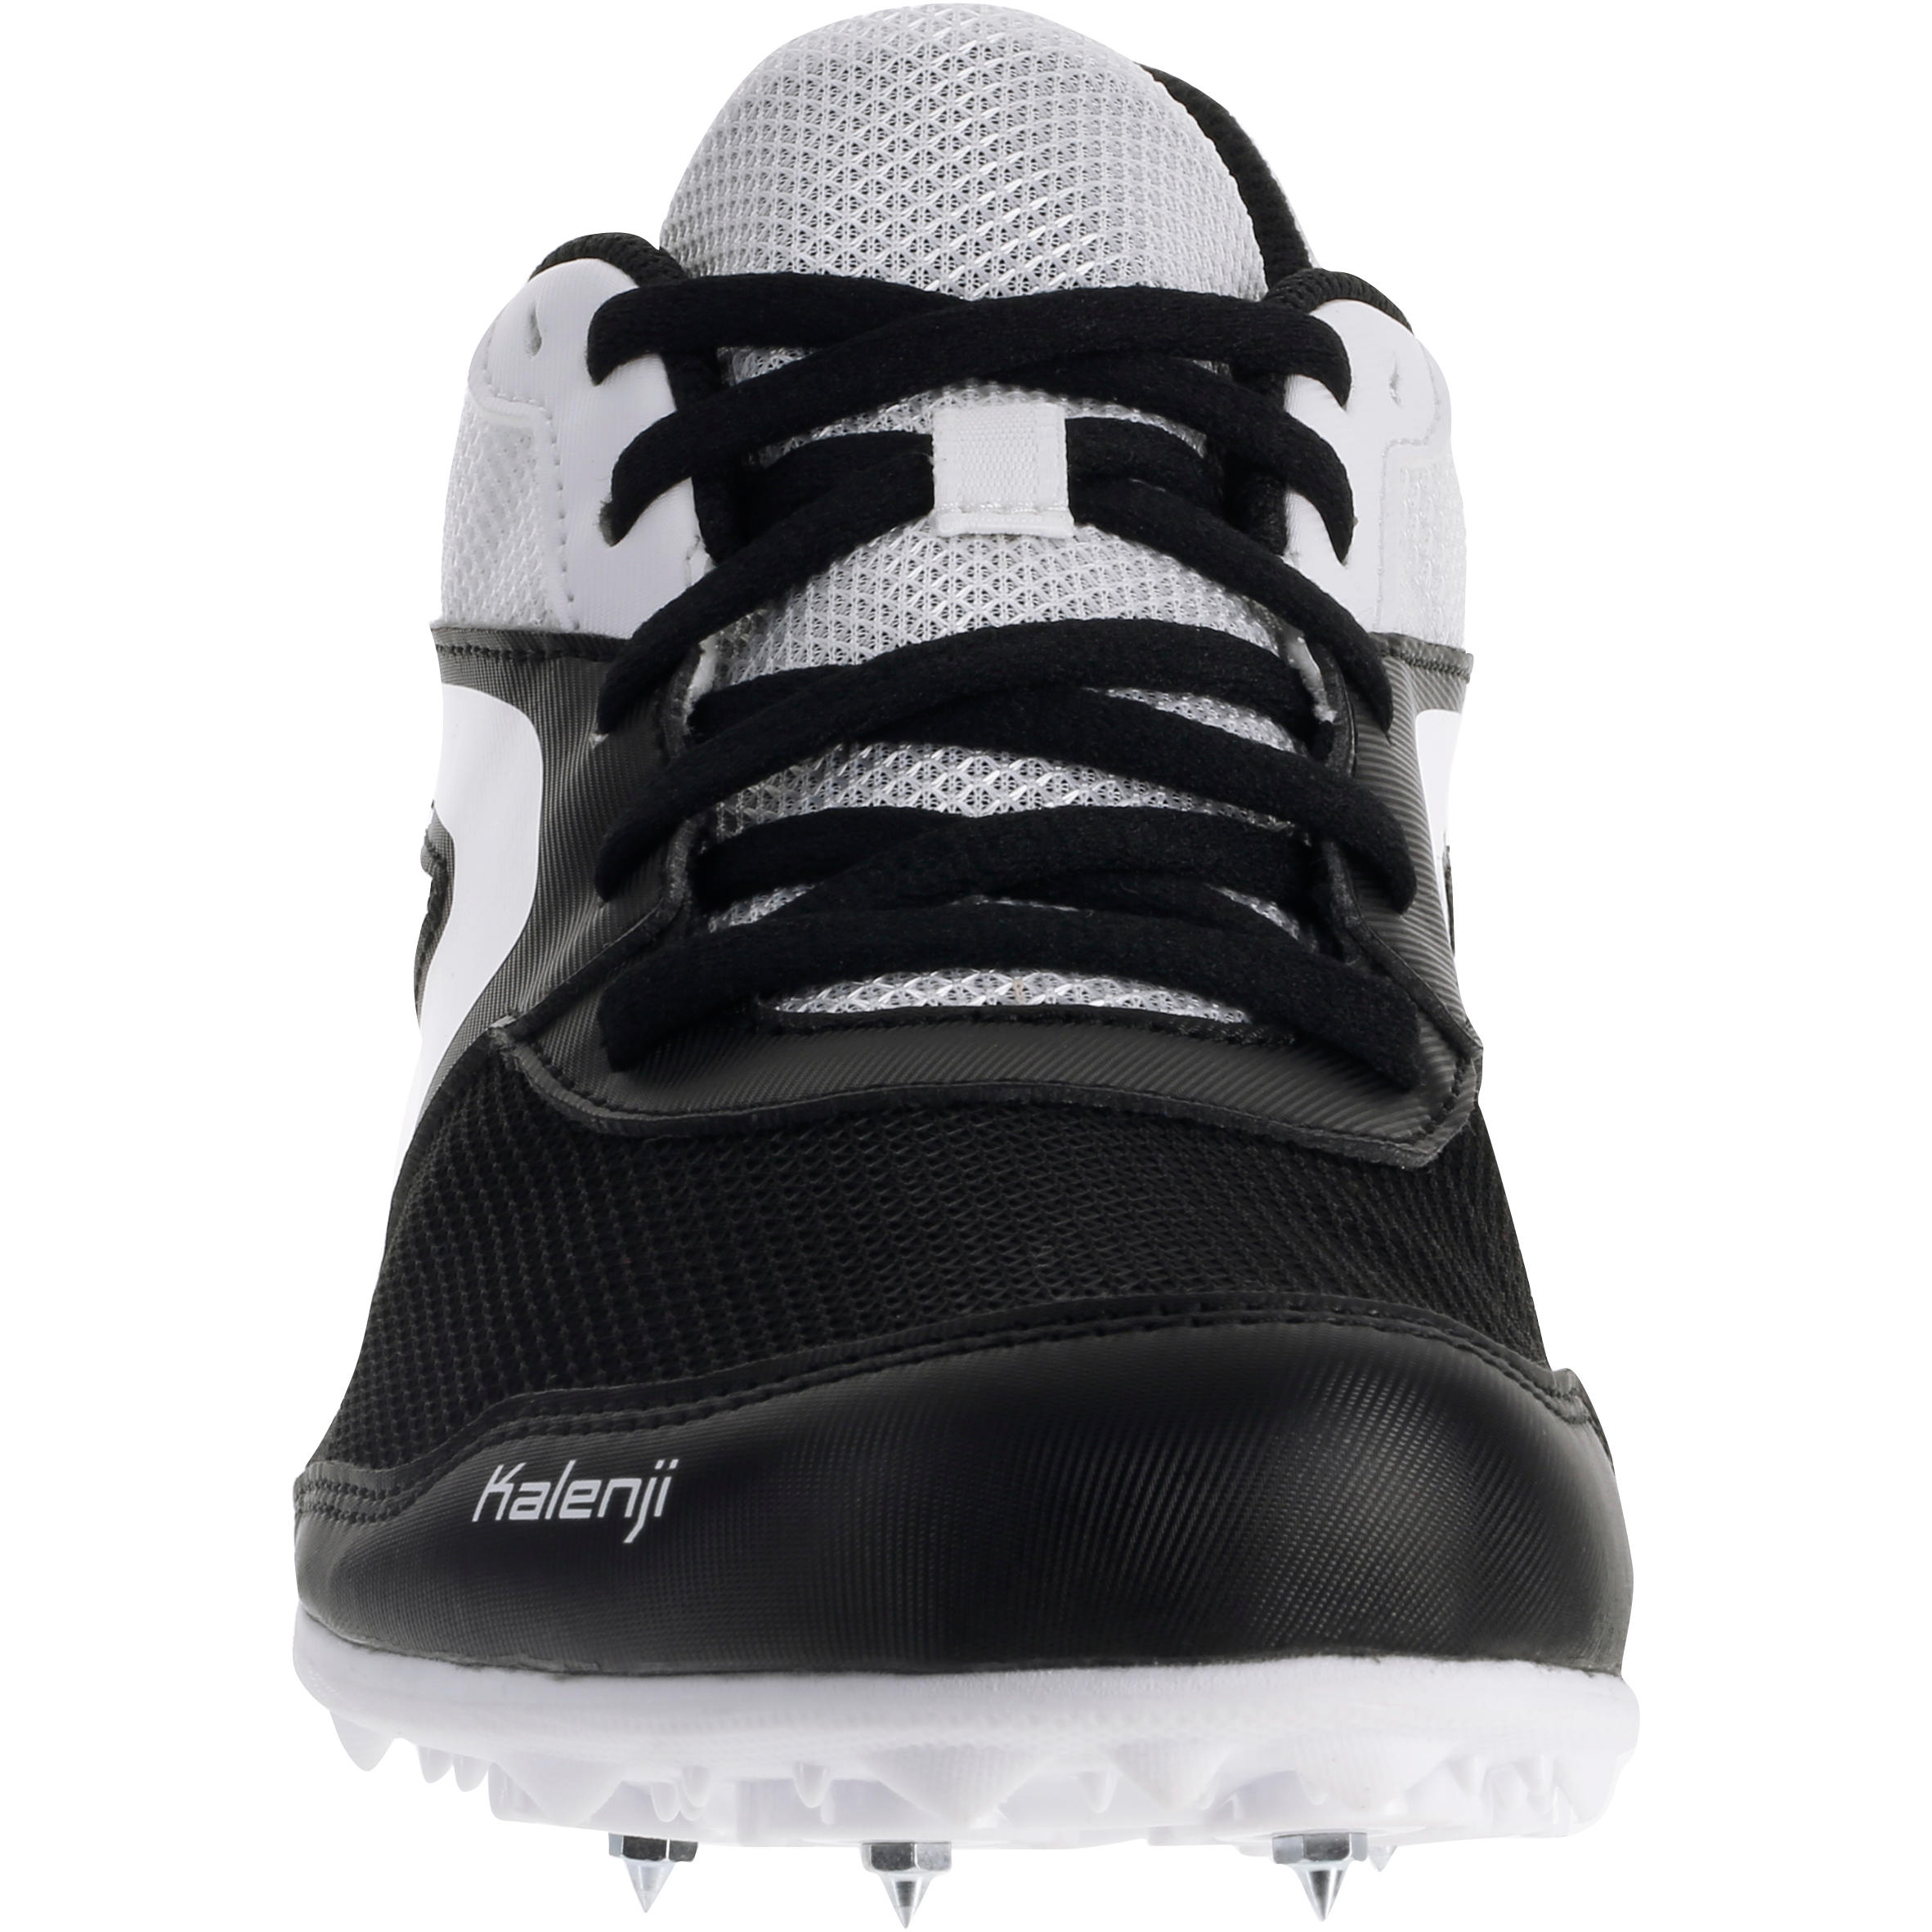 ATHLETICS TRAINERS WITH SPIKES BLACK WHITE 4/18